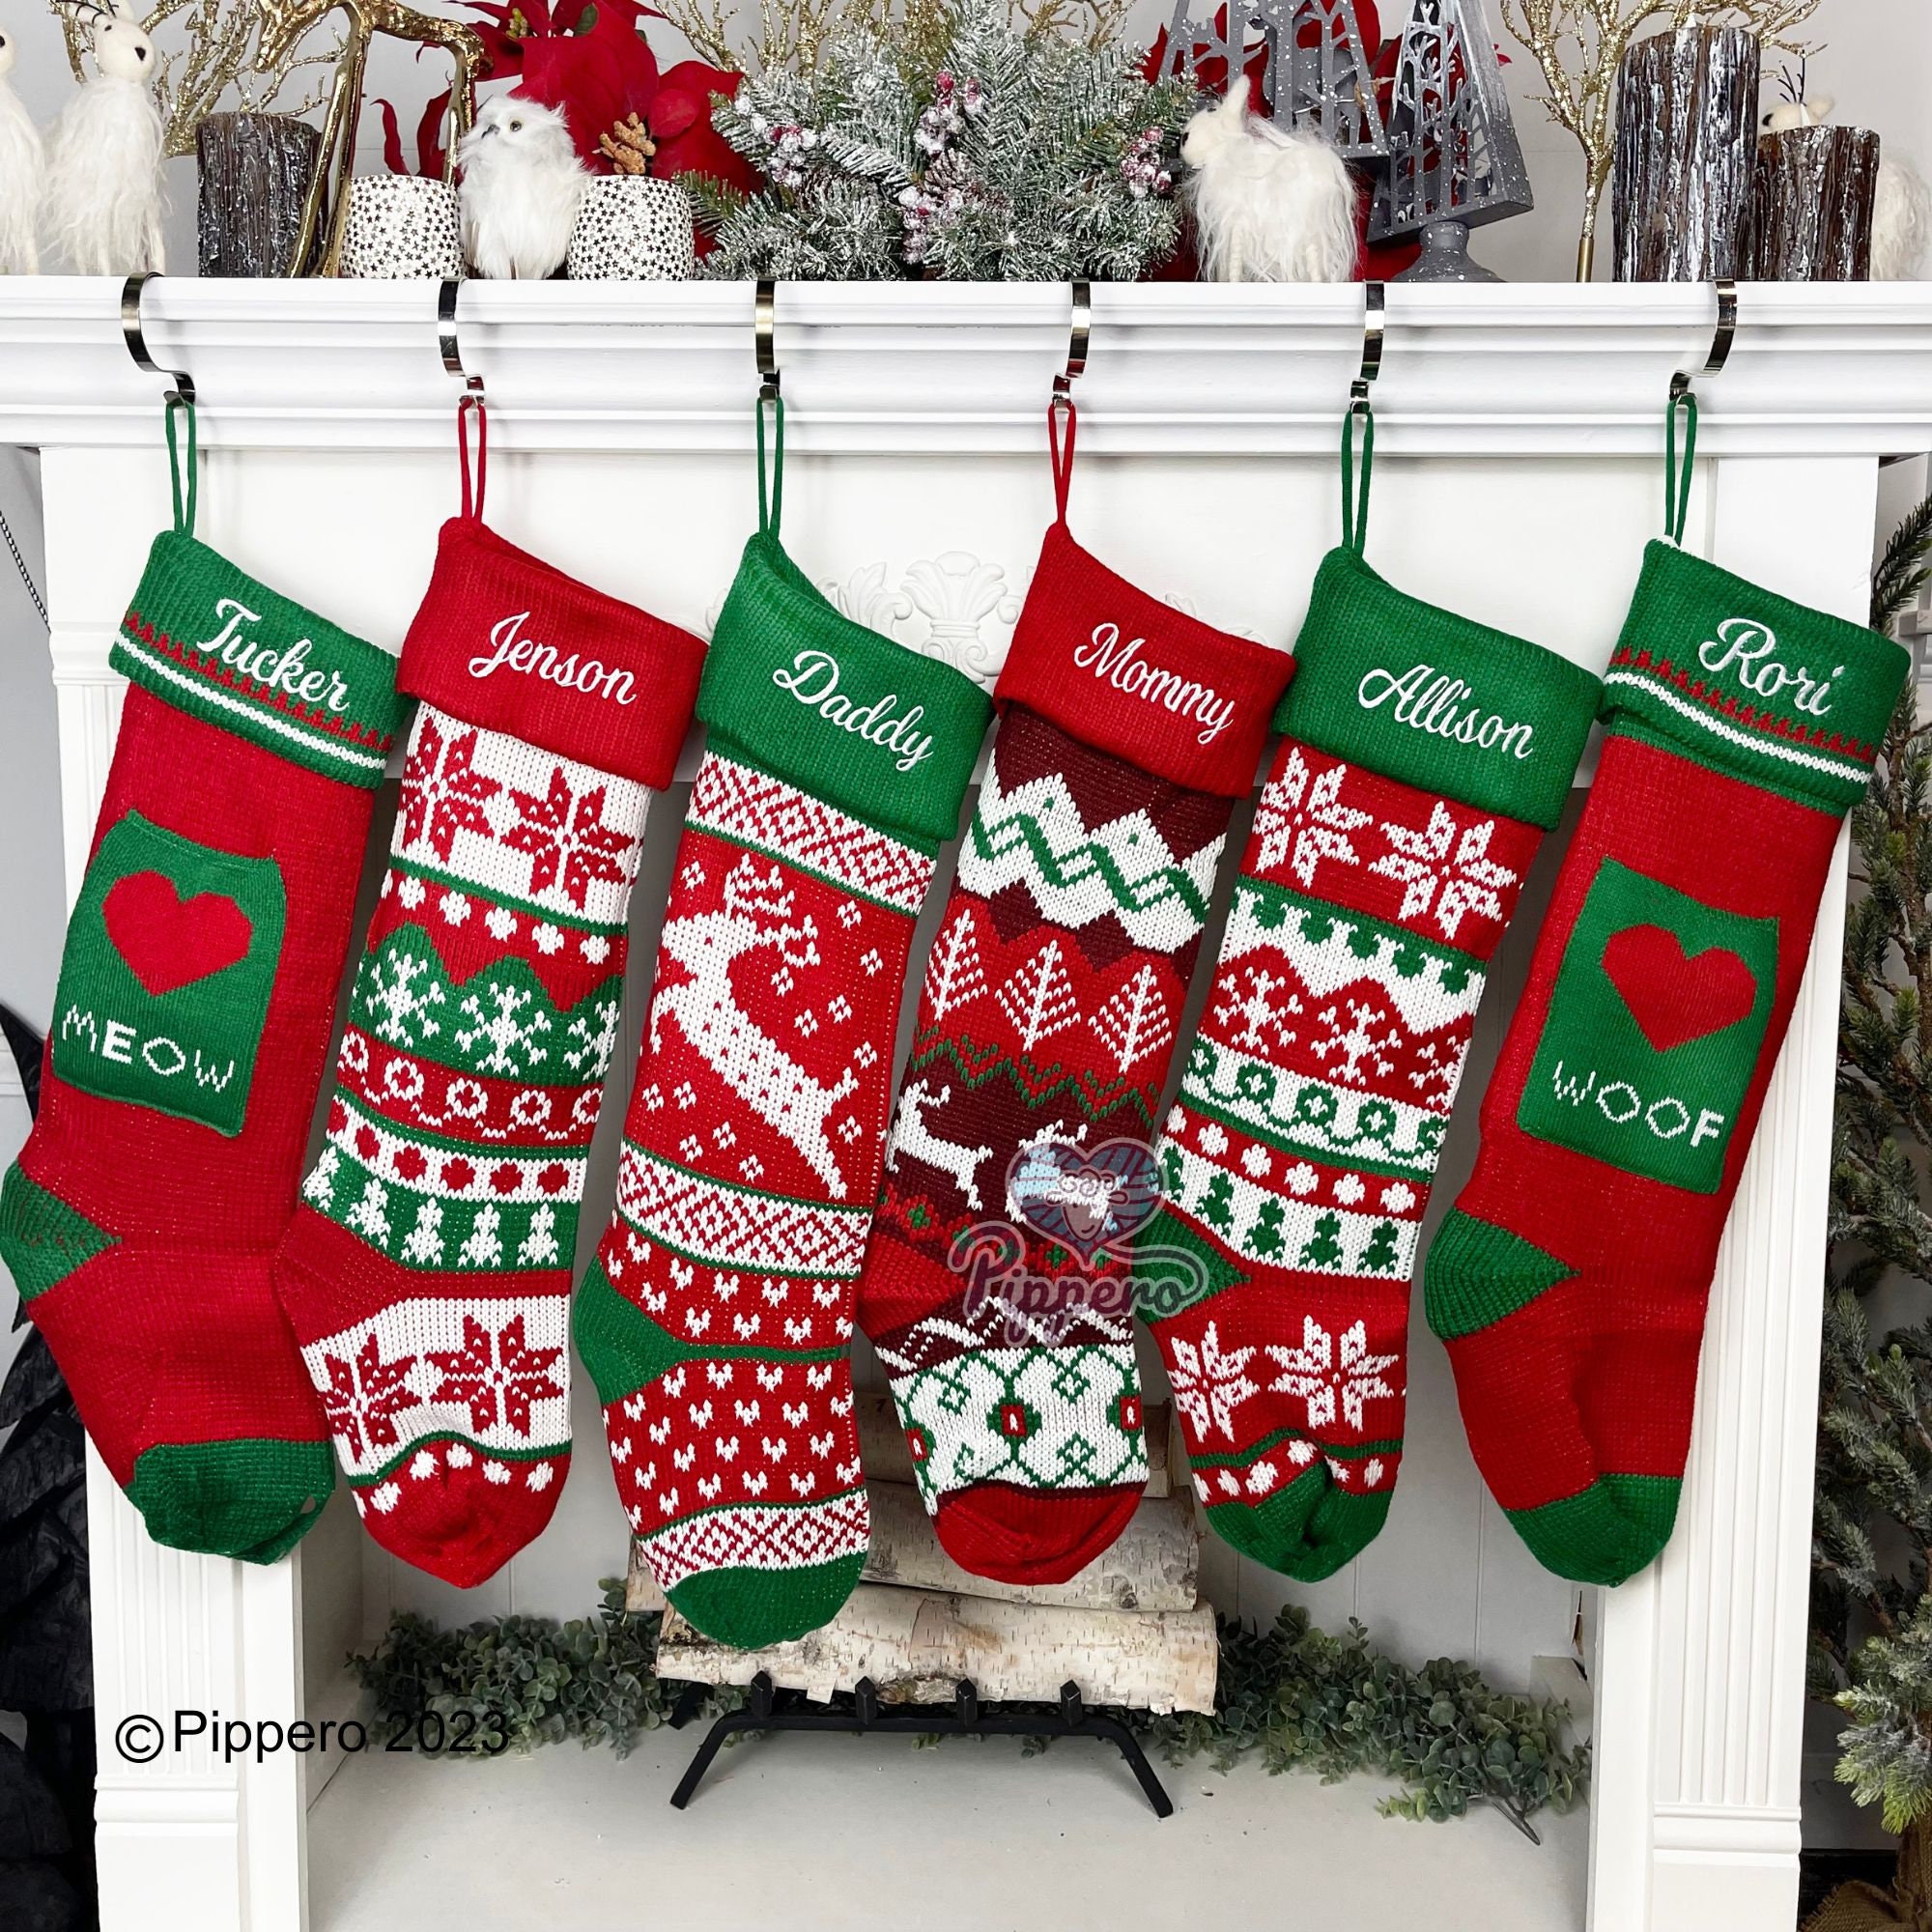  60 Pcs Felt Christmas Stockings 15 Inch Party Favors Stockings  Xmas Decoration Stockings Rustic Christmas Santa Stockings for Christmas  Holidays Anniversaries Home Bedroom (White Trim, Red Green) : Home & Kitchen